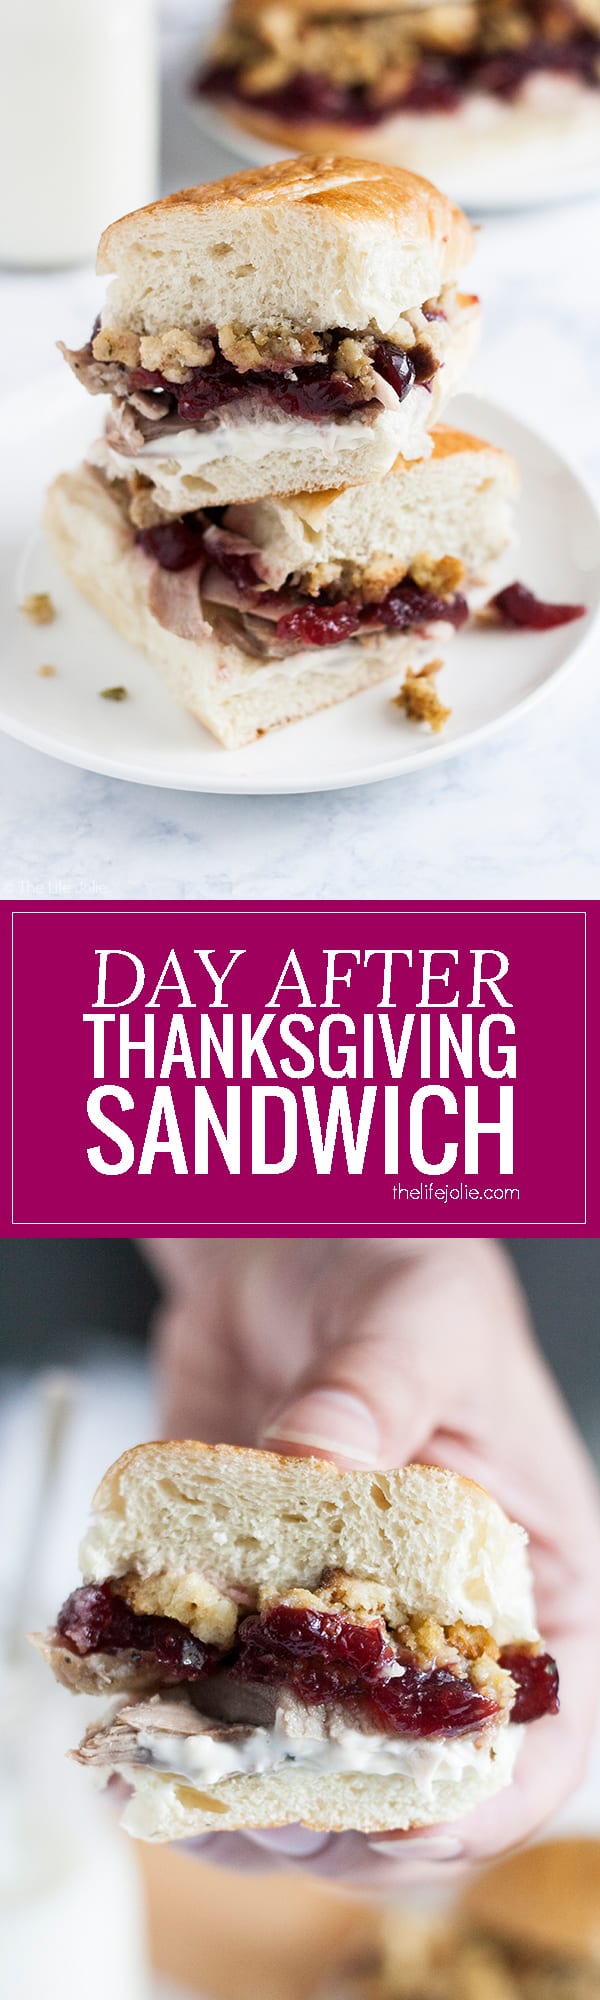 This Day After Thanksgiving Sandwich is one of my favorite recipes to enjoy leftovers! Tender turkey, sandwiched between halves of your favorite bun with tangy cranberry sauce, savory stuffing and mayonnaise. I love enjoying this for lunches or dinners around the holidays!